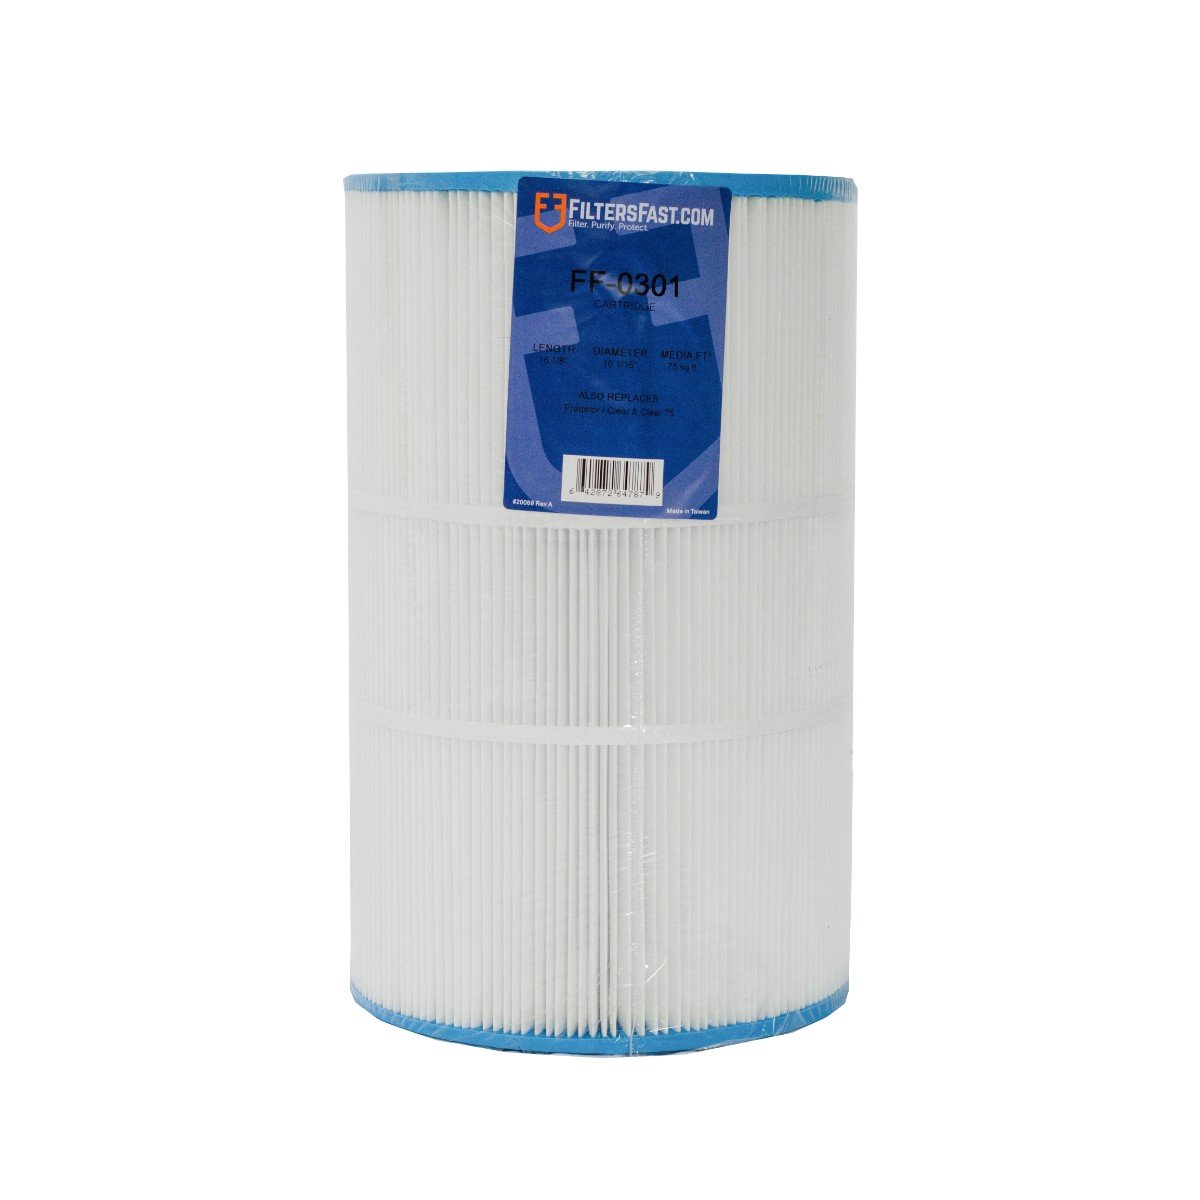 59054100 Filters Fast® FF-0301 Replacement for Pentair 59054100